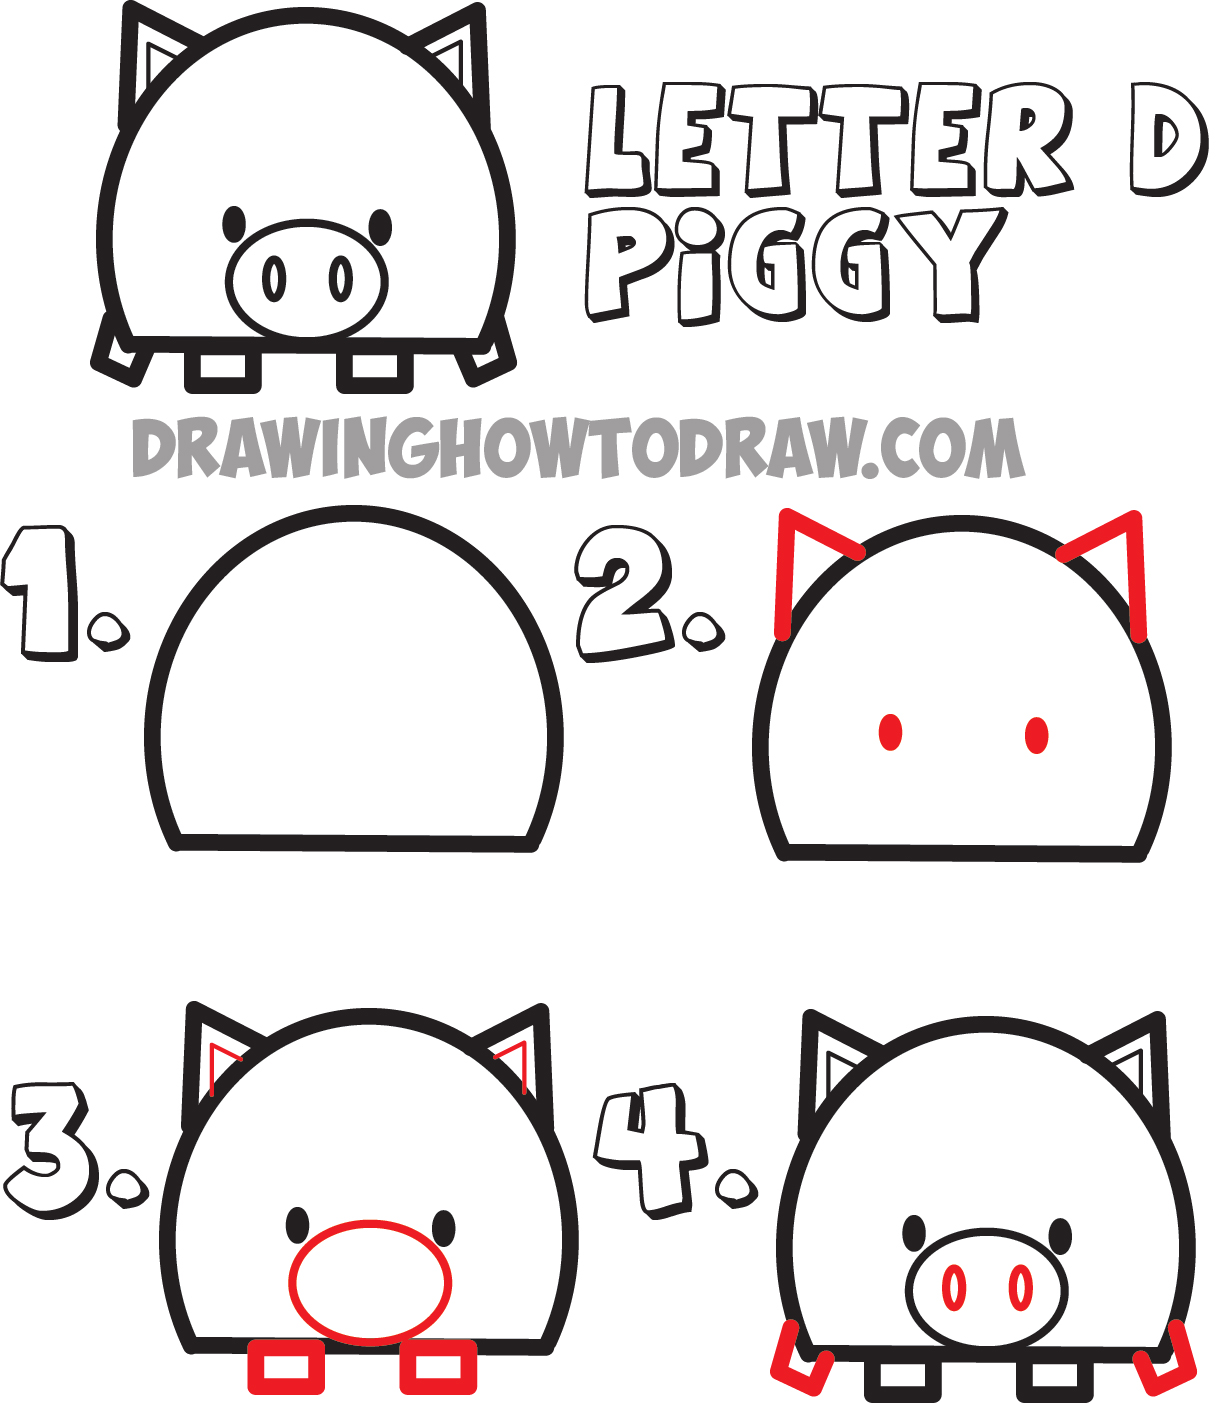 how to draw cartoon pigs from the letter D shape